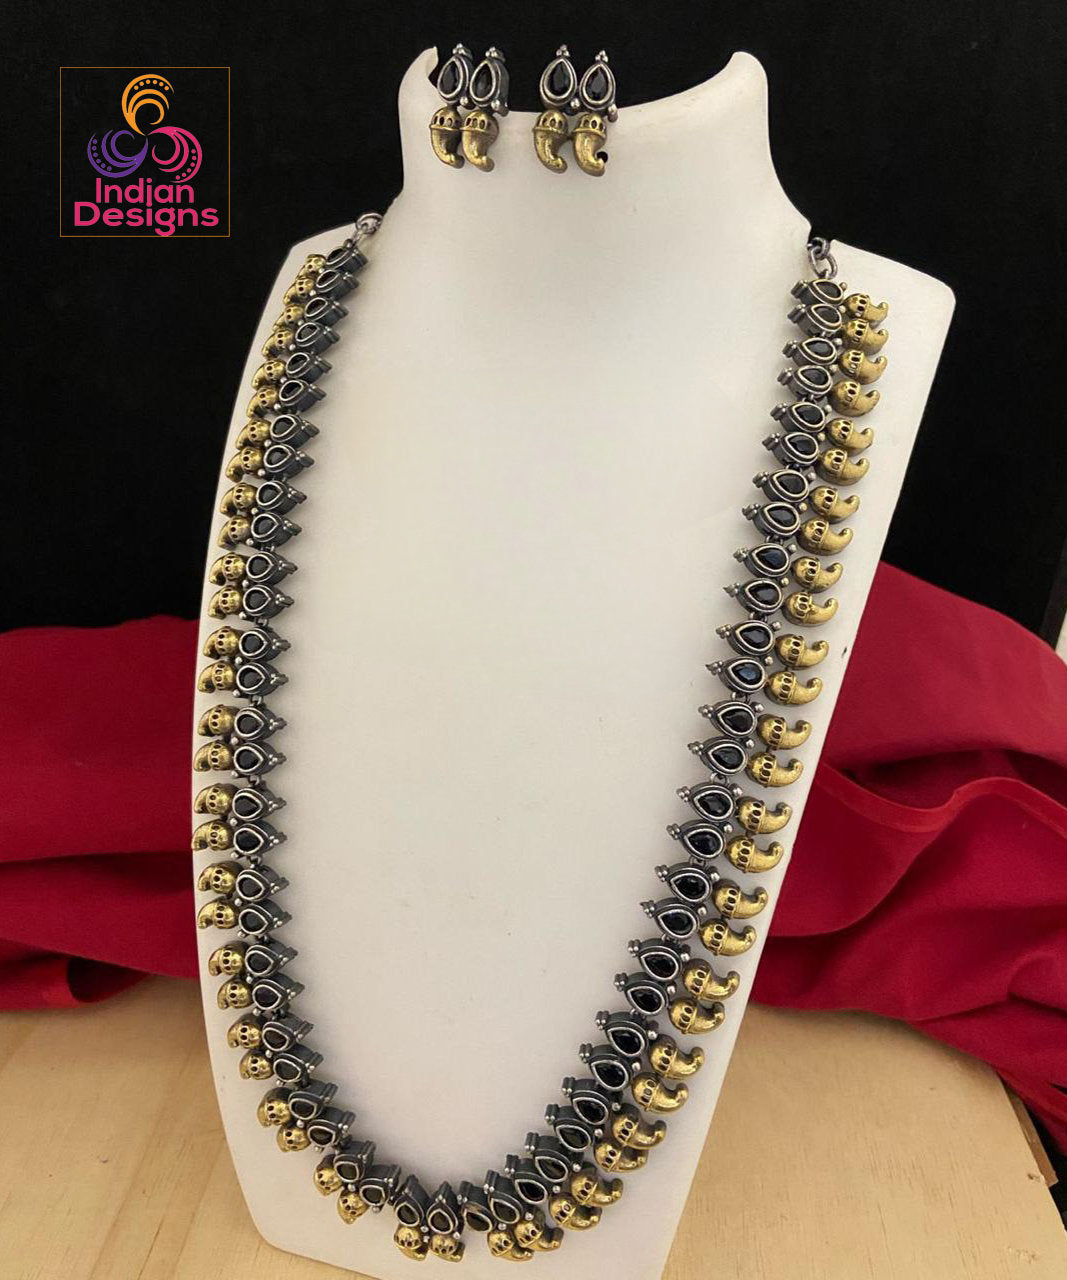 Oxidized Silver Two tone Long necklace with black stones, Indian Wedding Jewelry, German Silver necklace and Earrings, Long necklace for saree, Antique silver-Gold tone necklace, Indian Temple jewelry,